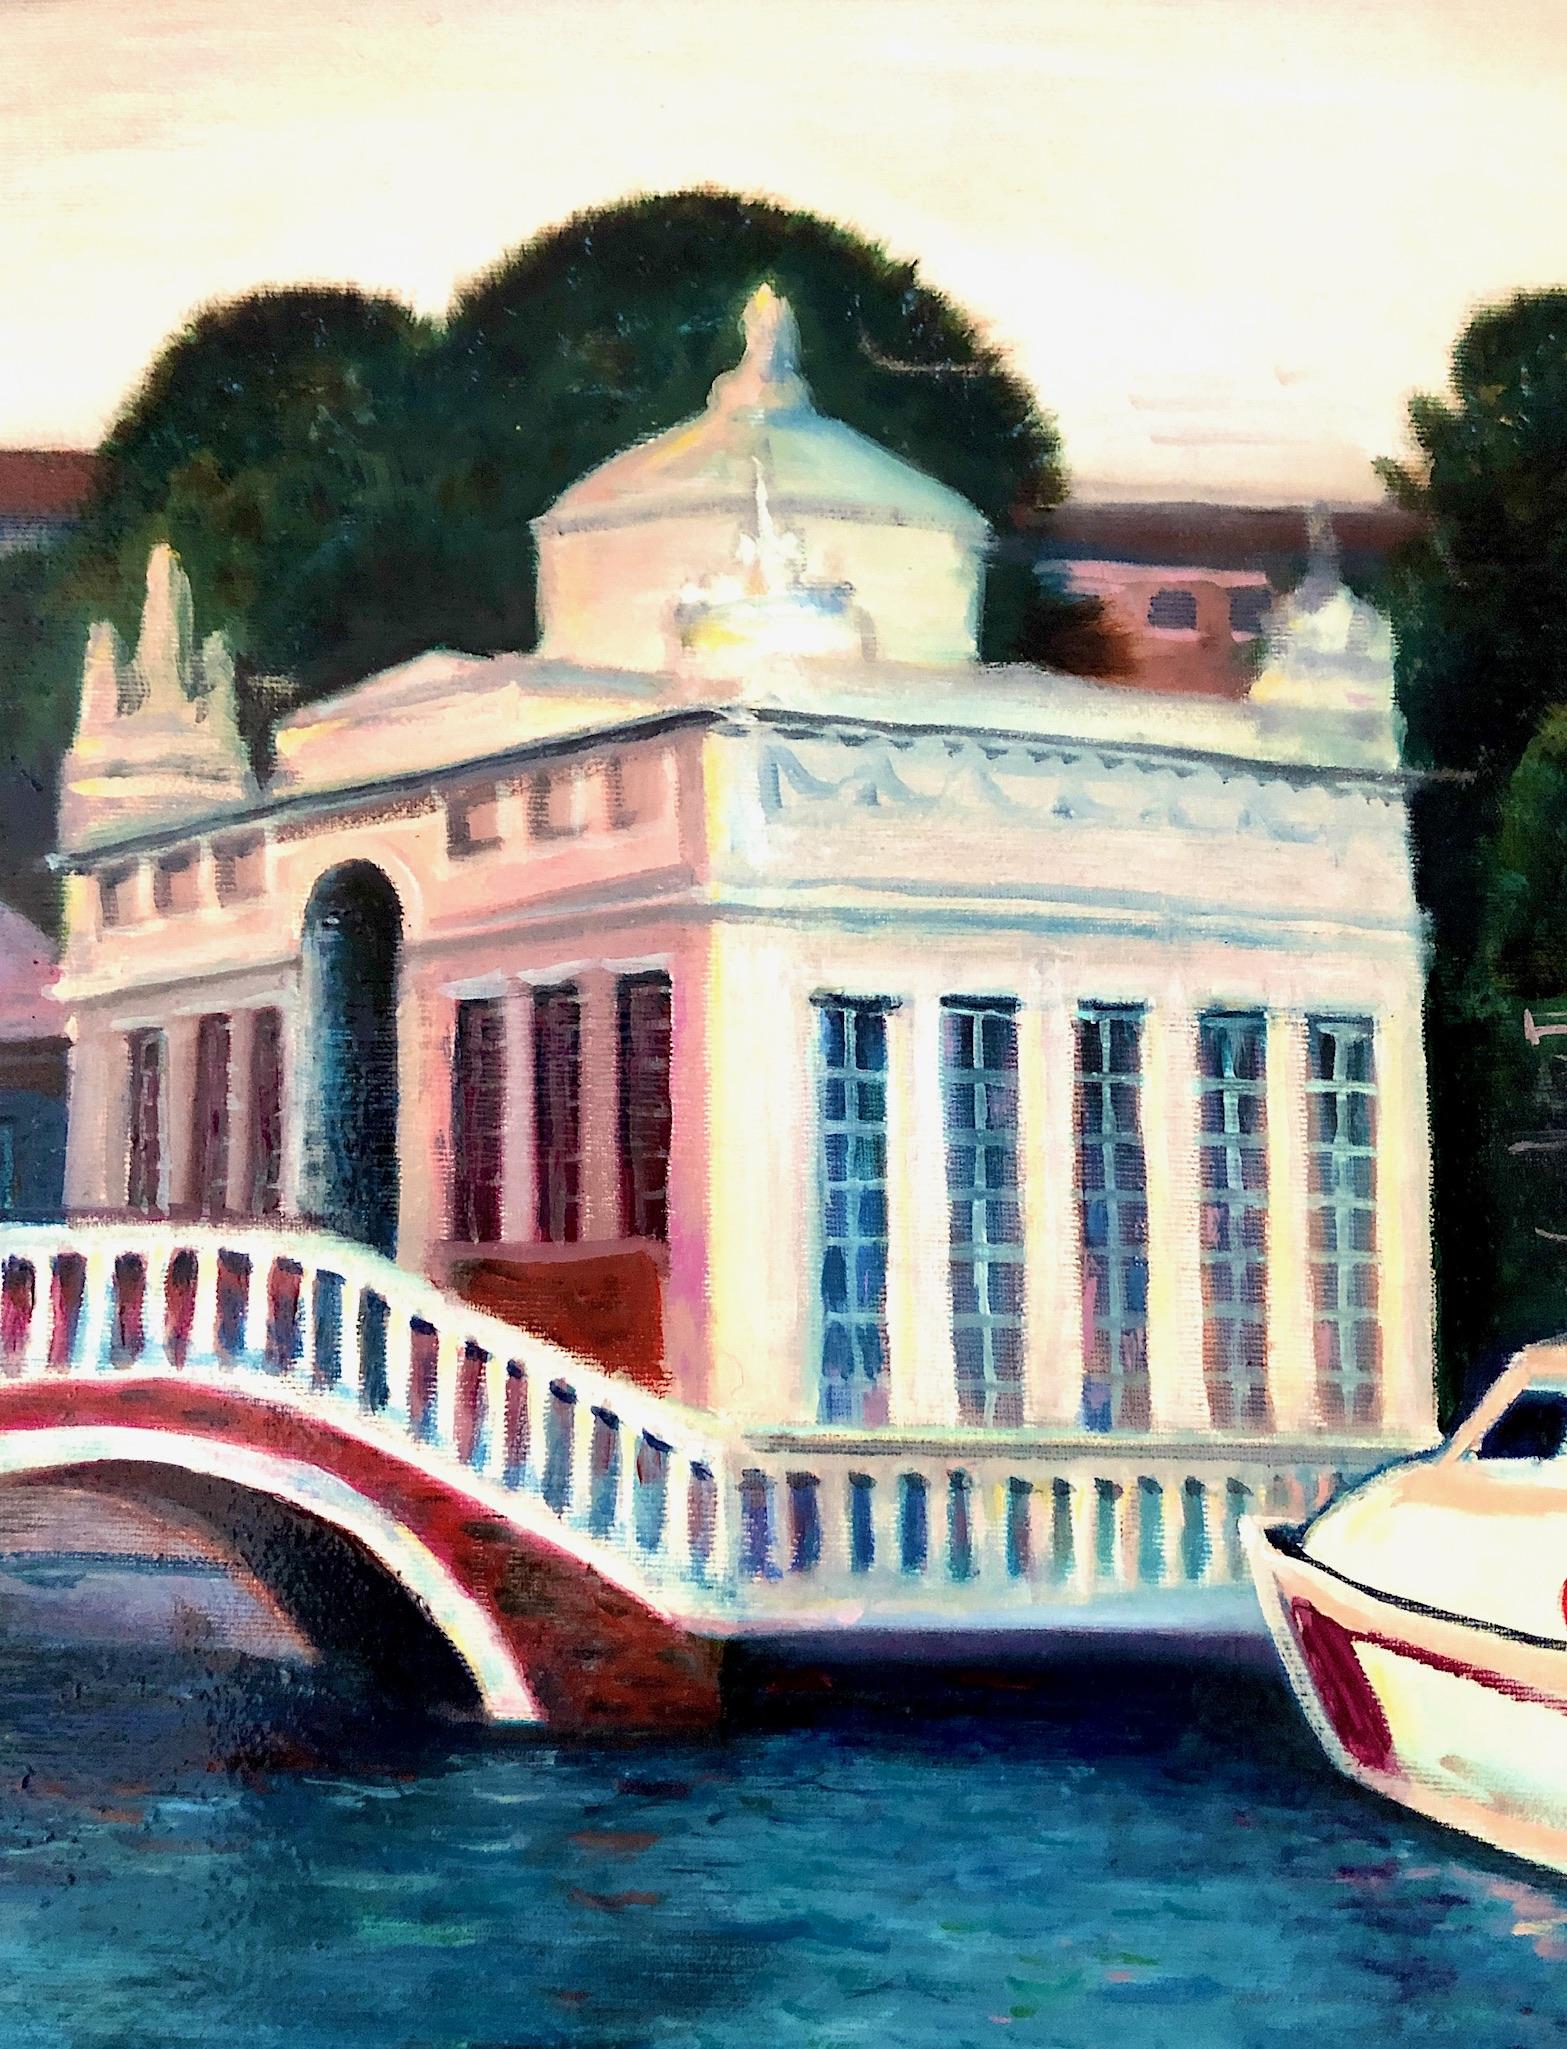    This artwork was painted in 2015. The beauty of Venice inspired me.
The sketch was made in an open air from a boat in Venetia gulf during the vacation in Italy. It was a very romantic trip with my future husband. Later this picture was painted